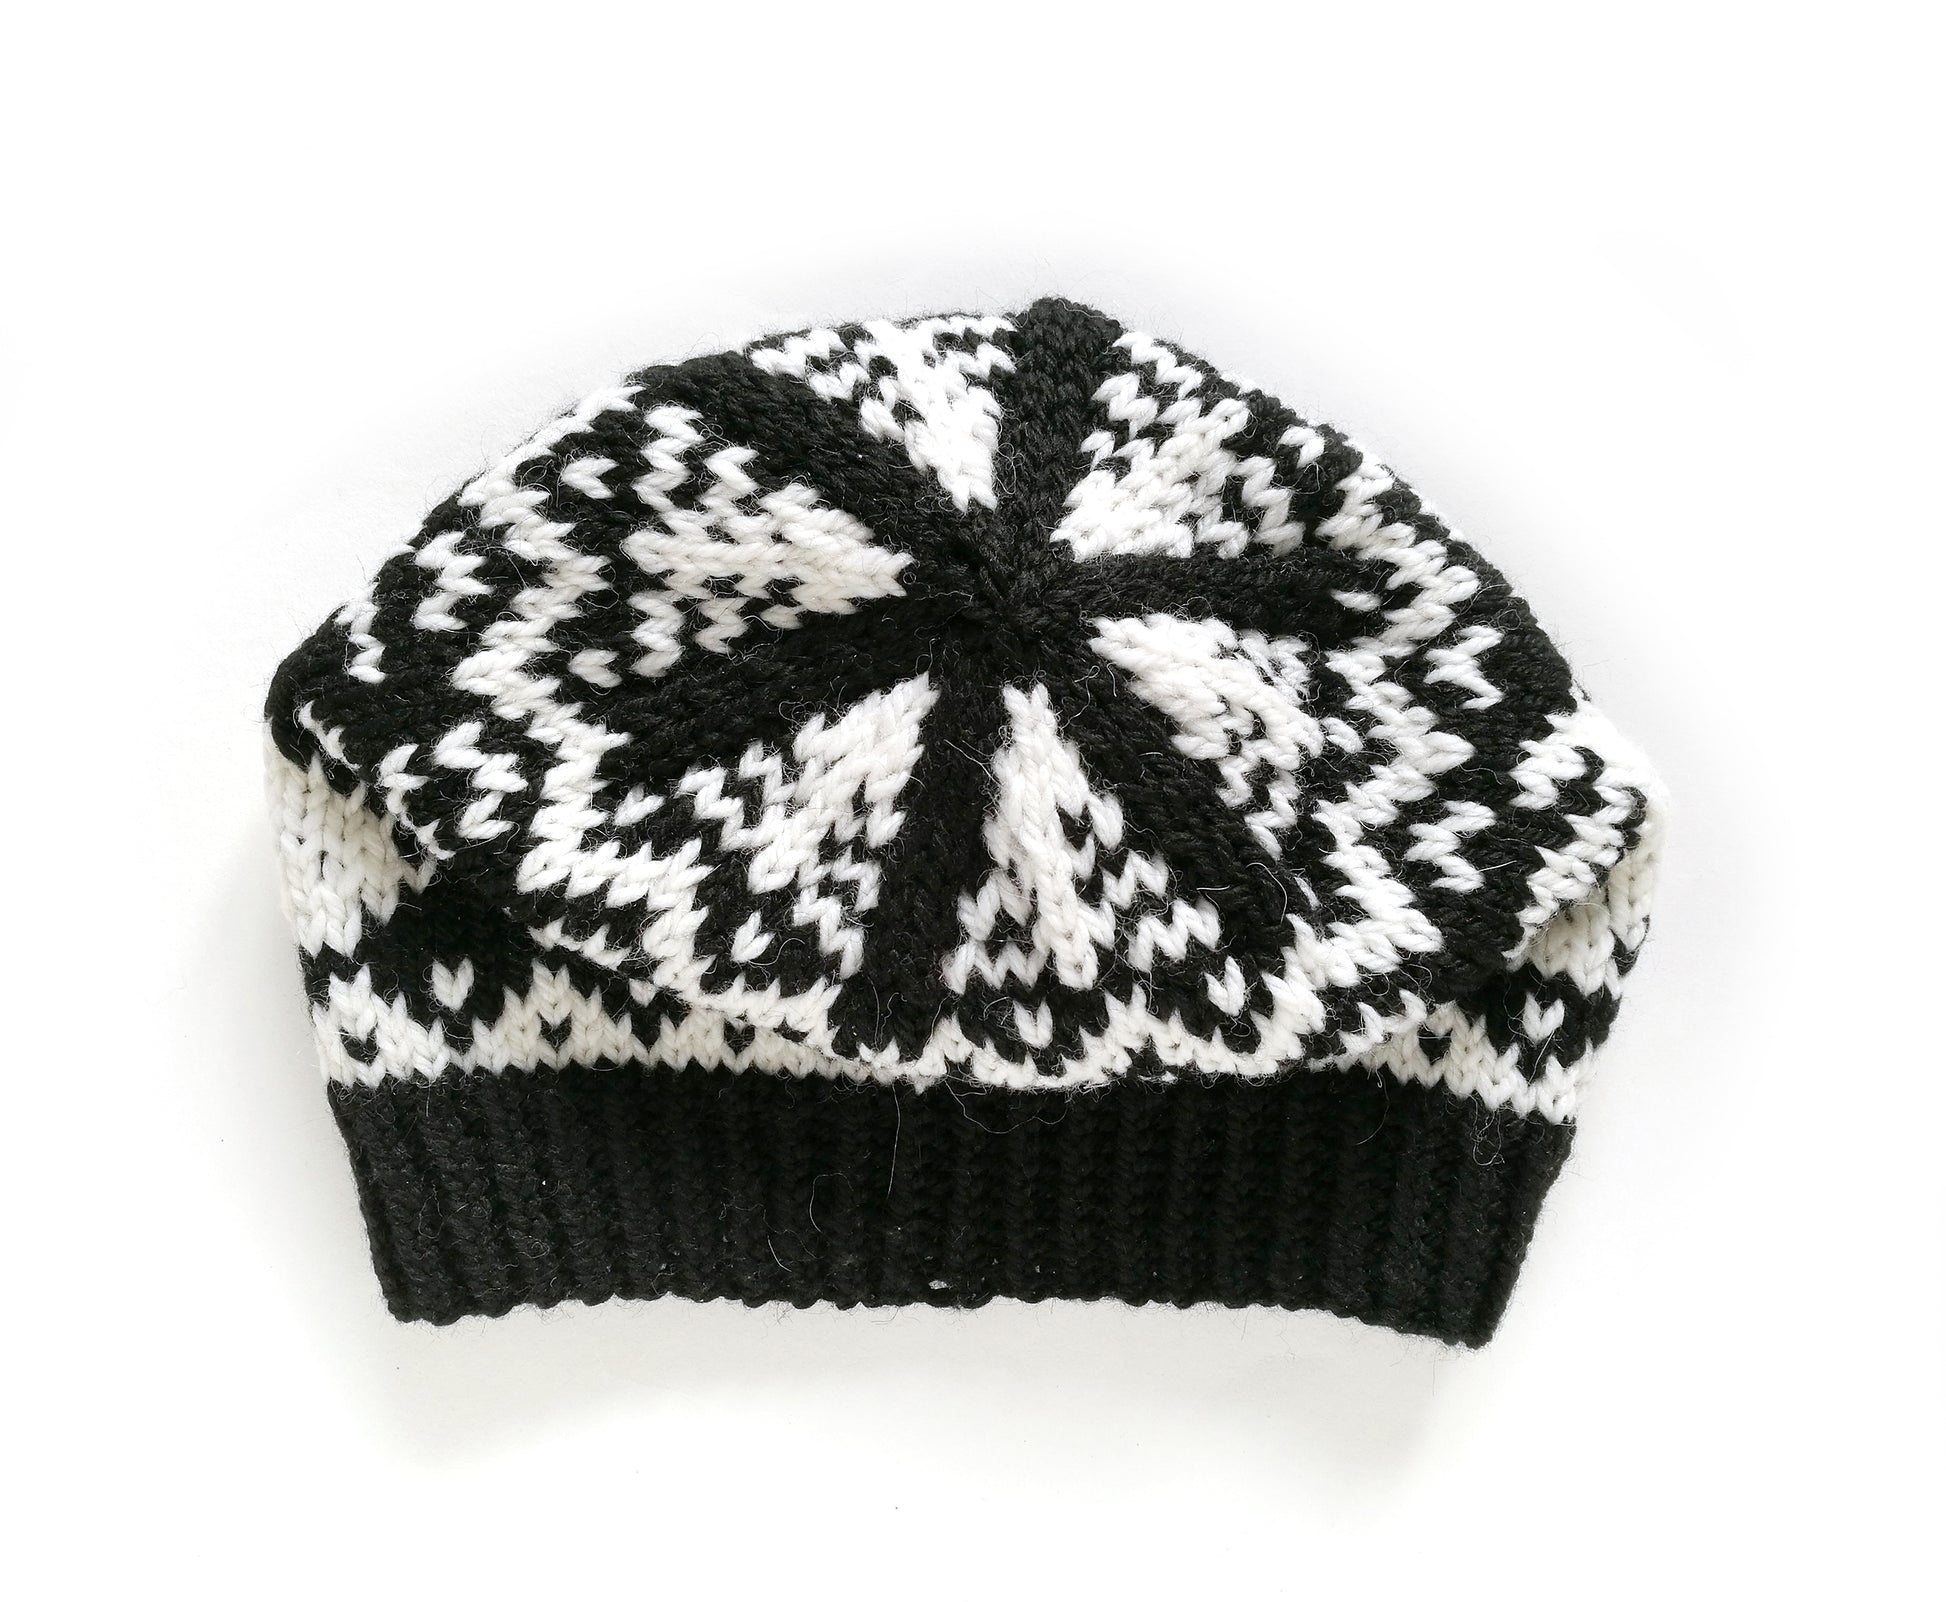 black and white wool hand-knitted Fair Isle beanie hat in Bunny Rabbit knitting pattern